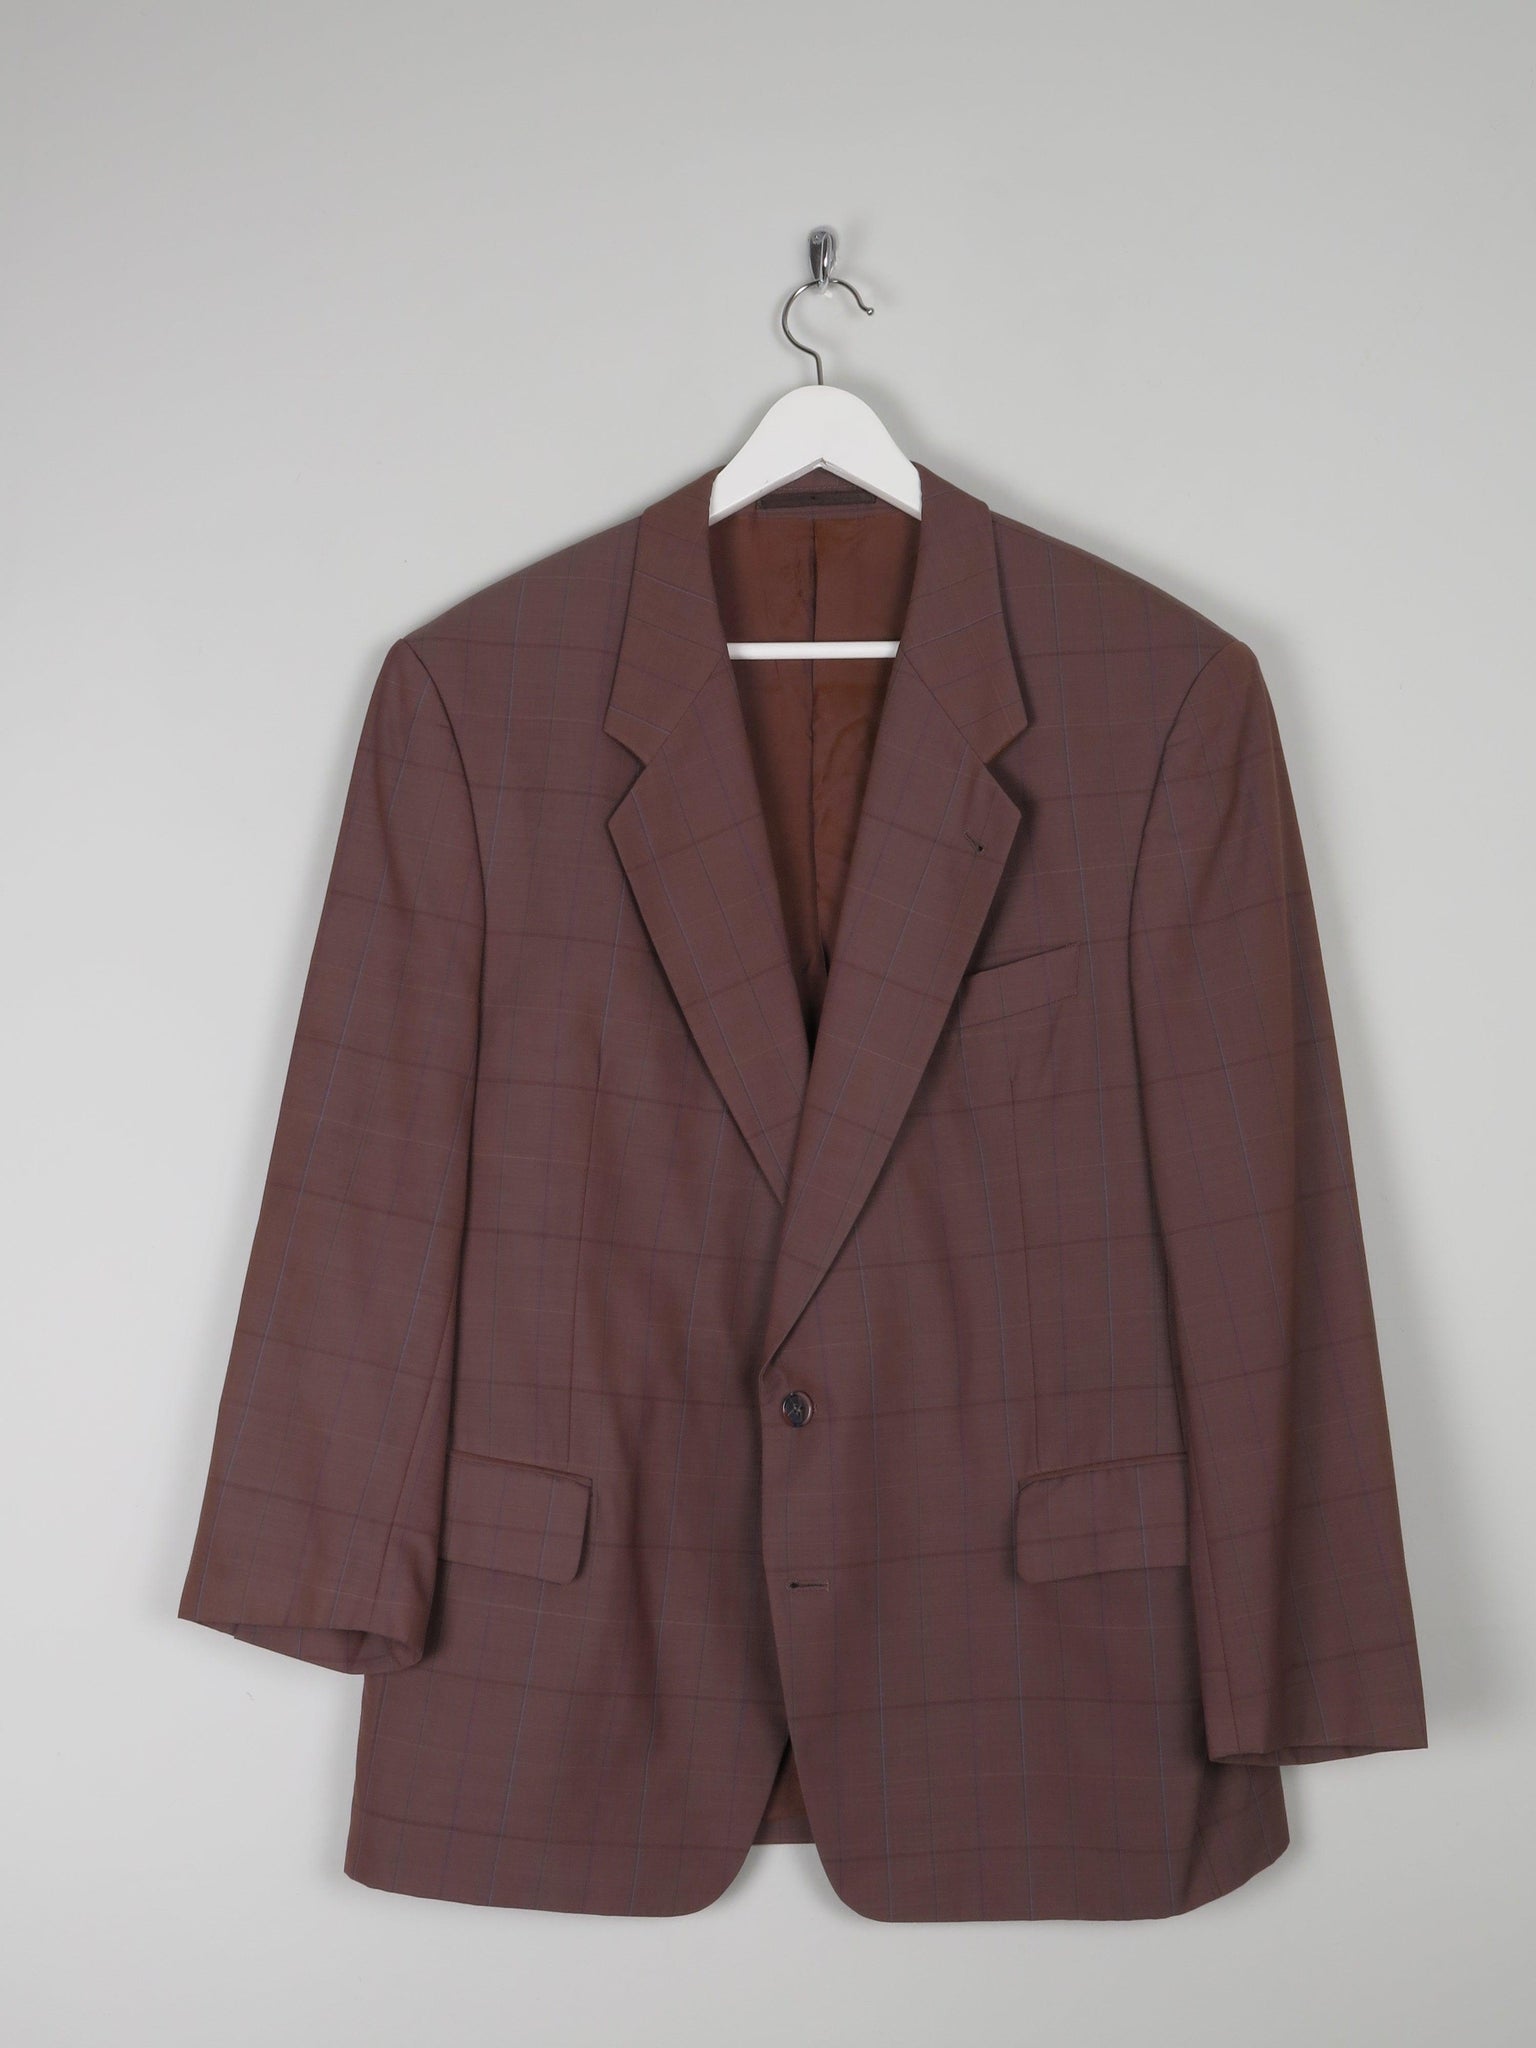 Mens Tan Brown Check Tailored Jacket 42/44 Chest sleeves 24 (s)